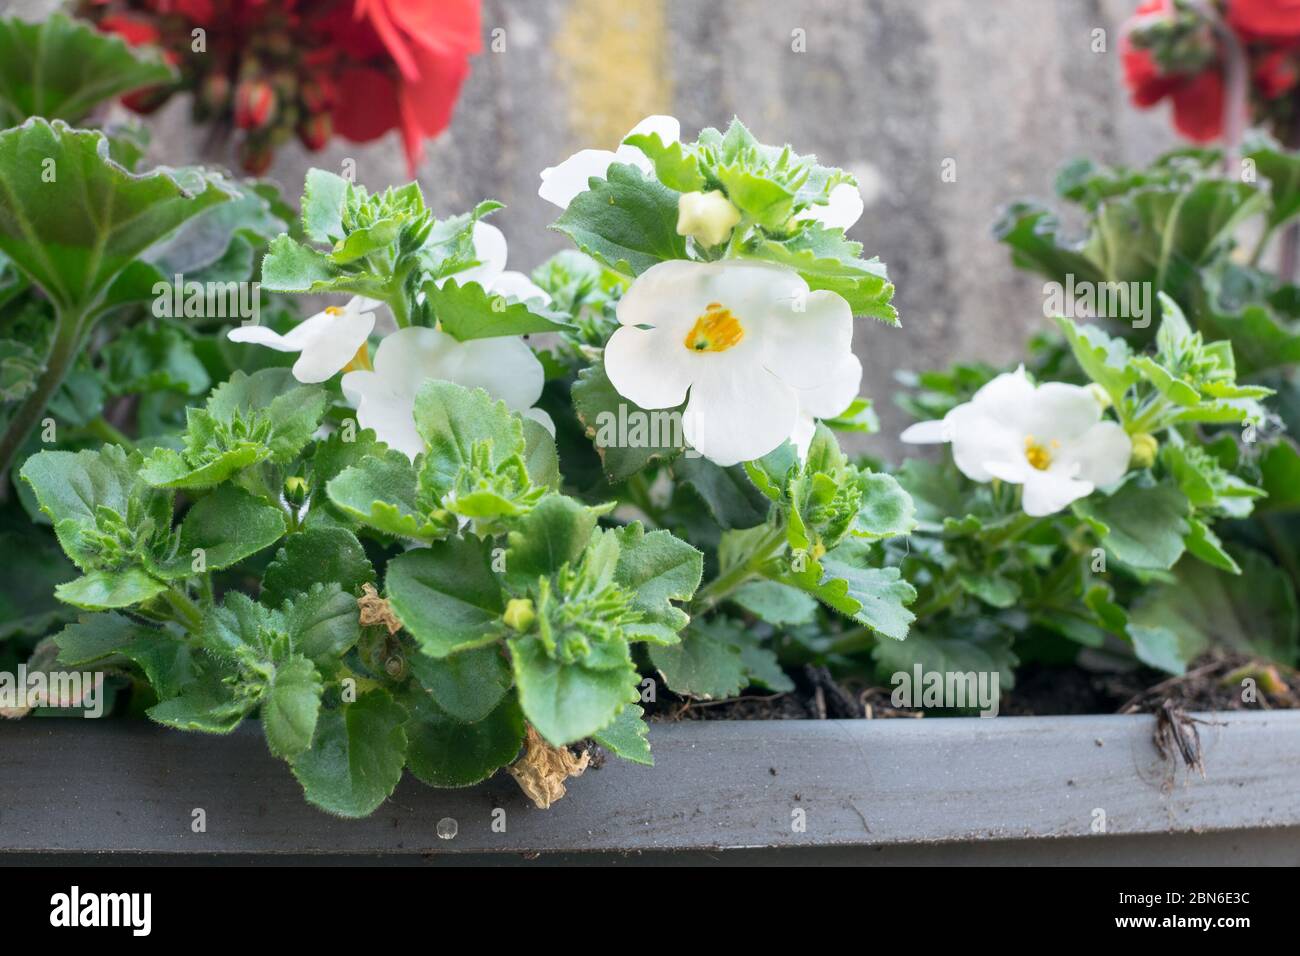 Detailed view of white flowering Bacopa, also known as Sutera cordata or Chaenostoma cordatum in a flower bed Stock Photo